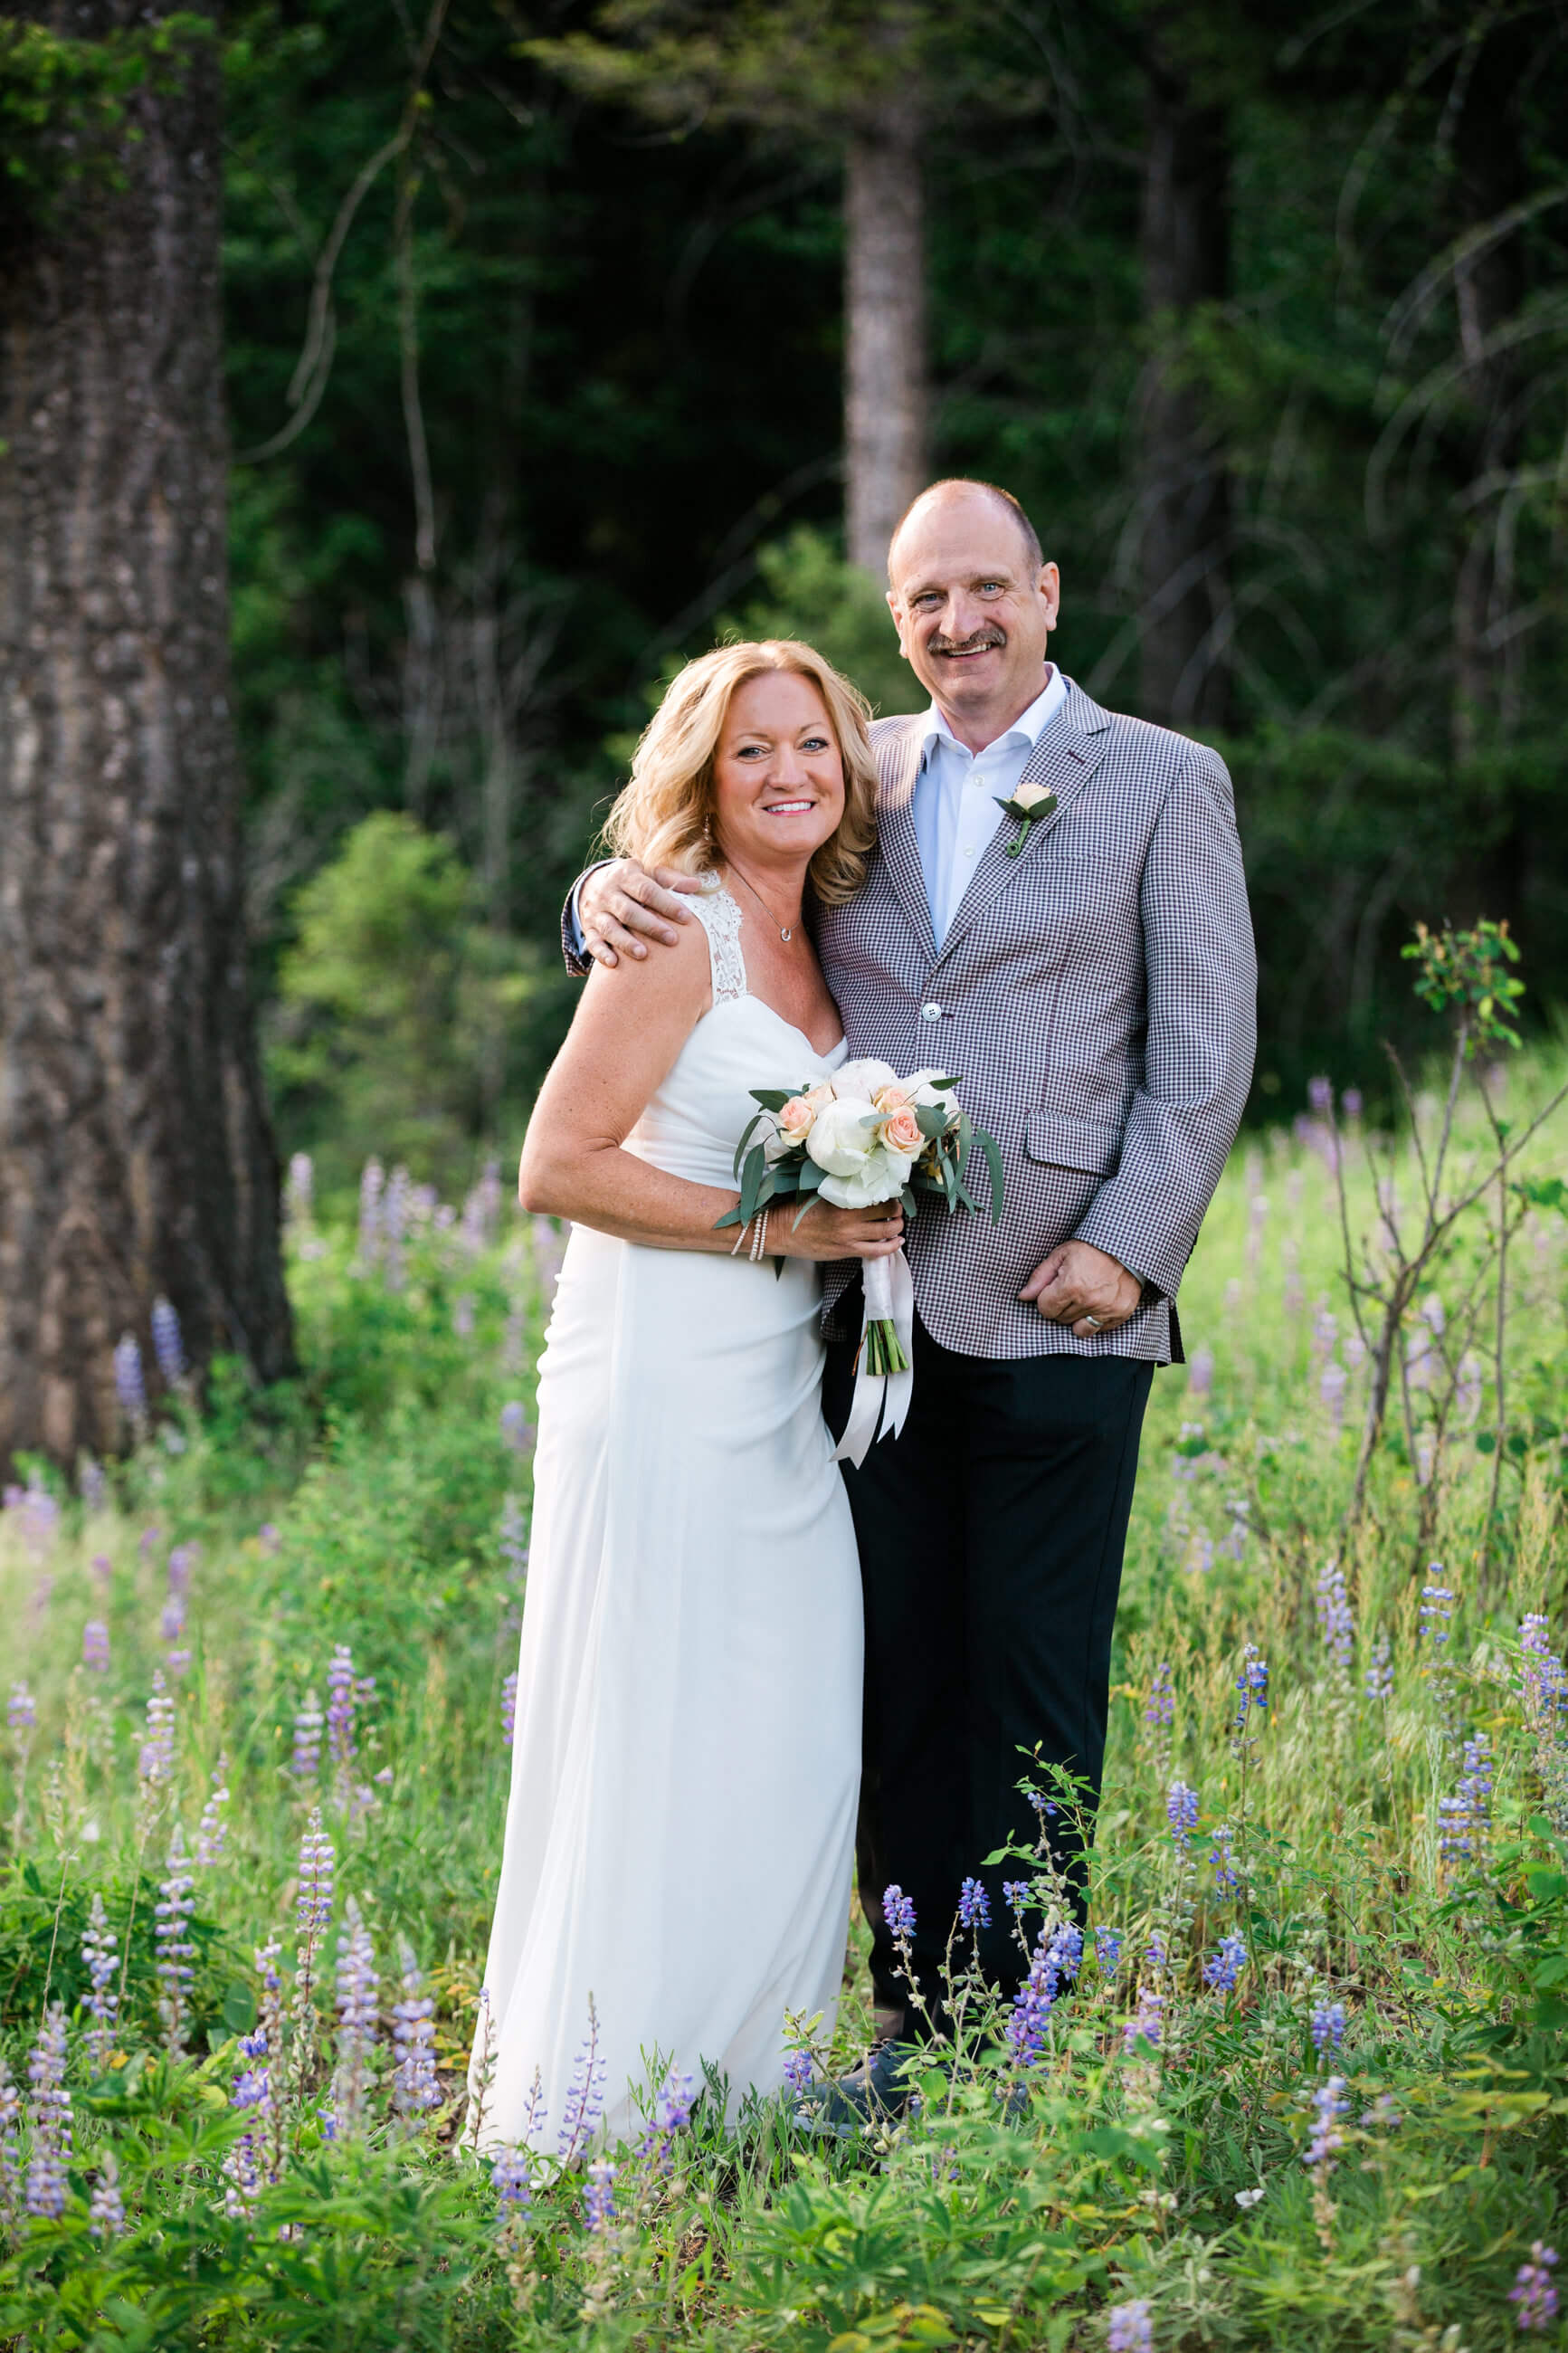 A bride and groom smile and stand in a field of lupine wildflowers during their intimate wedding at Triple Creek Ranch in Darby Montana